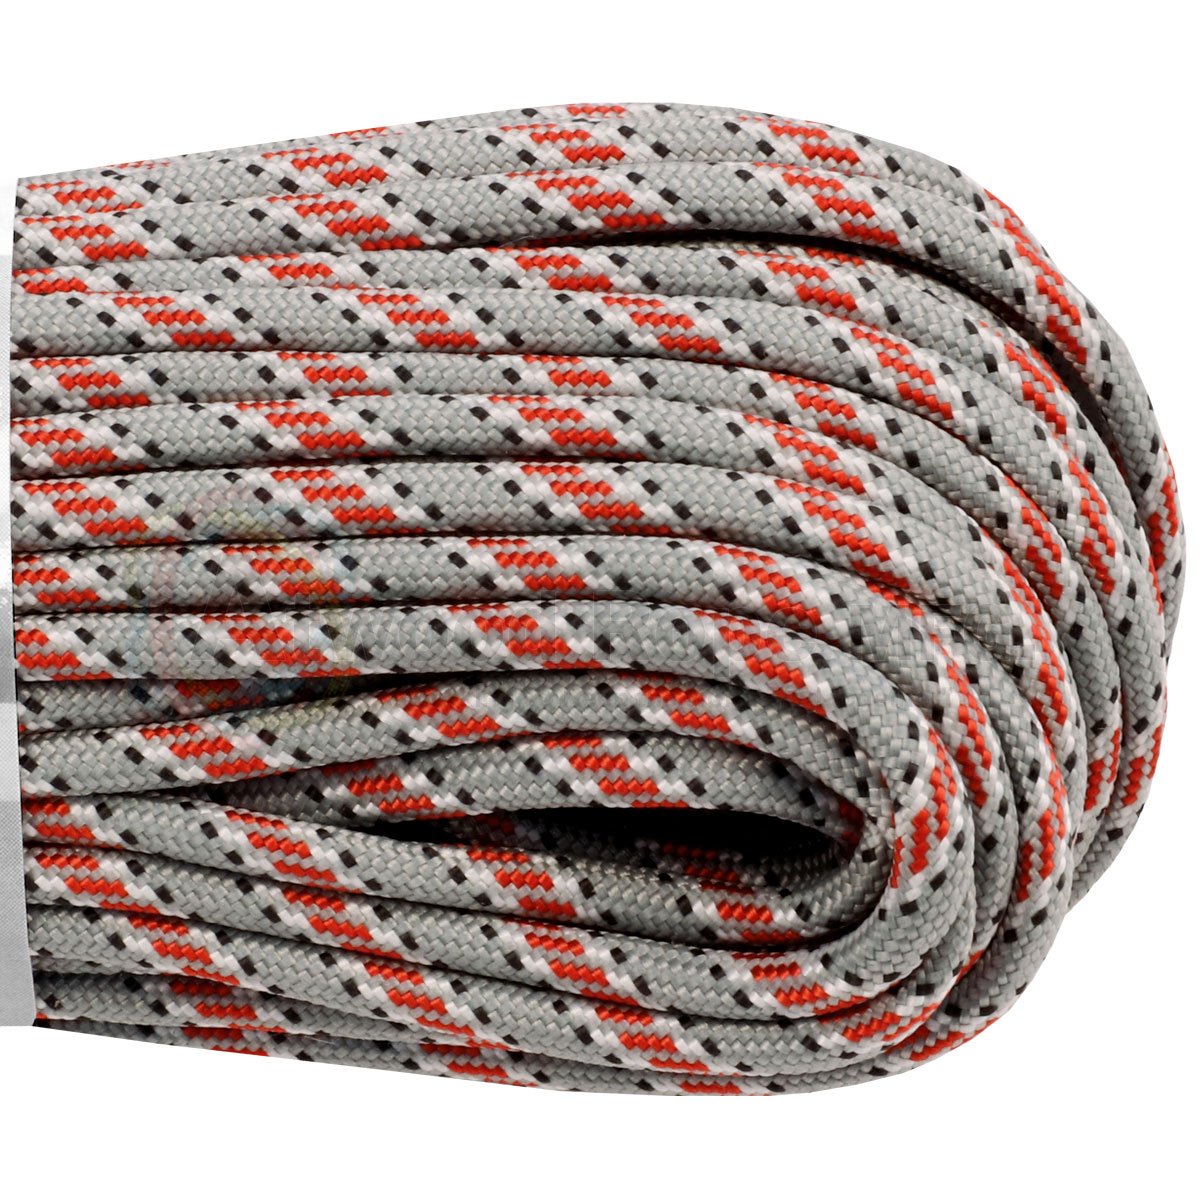 Atwood 550 Paracord - The Ohio State